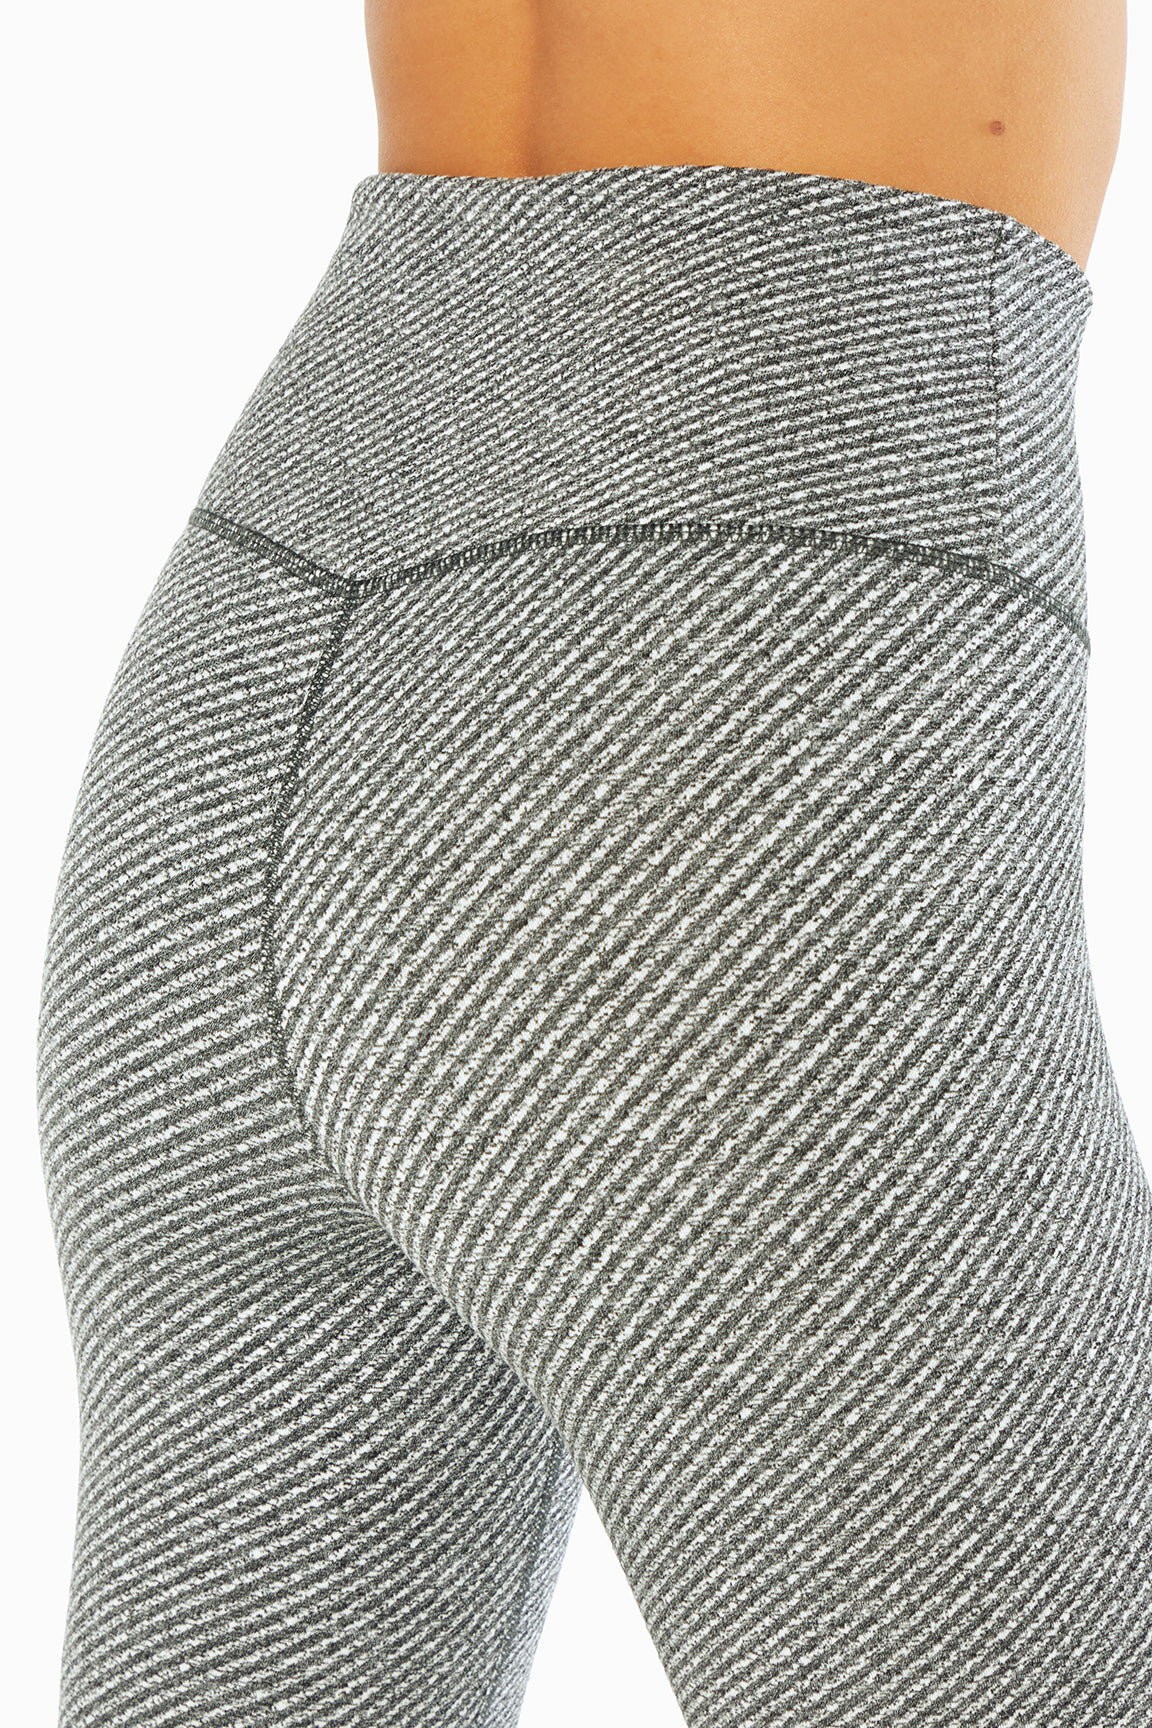 Lululemon Wunder Under High-Rise Tight *28 - Luon Variegated Knit